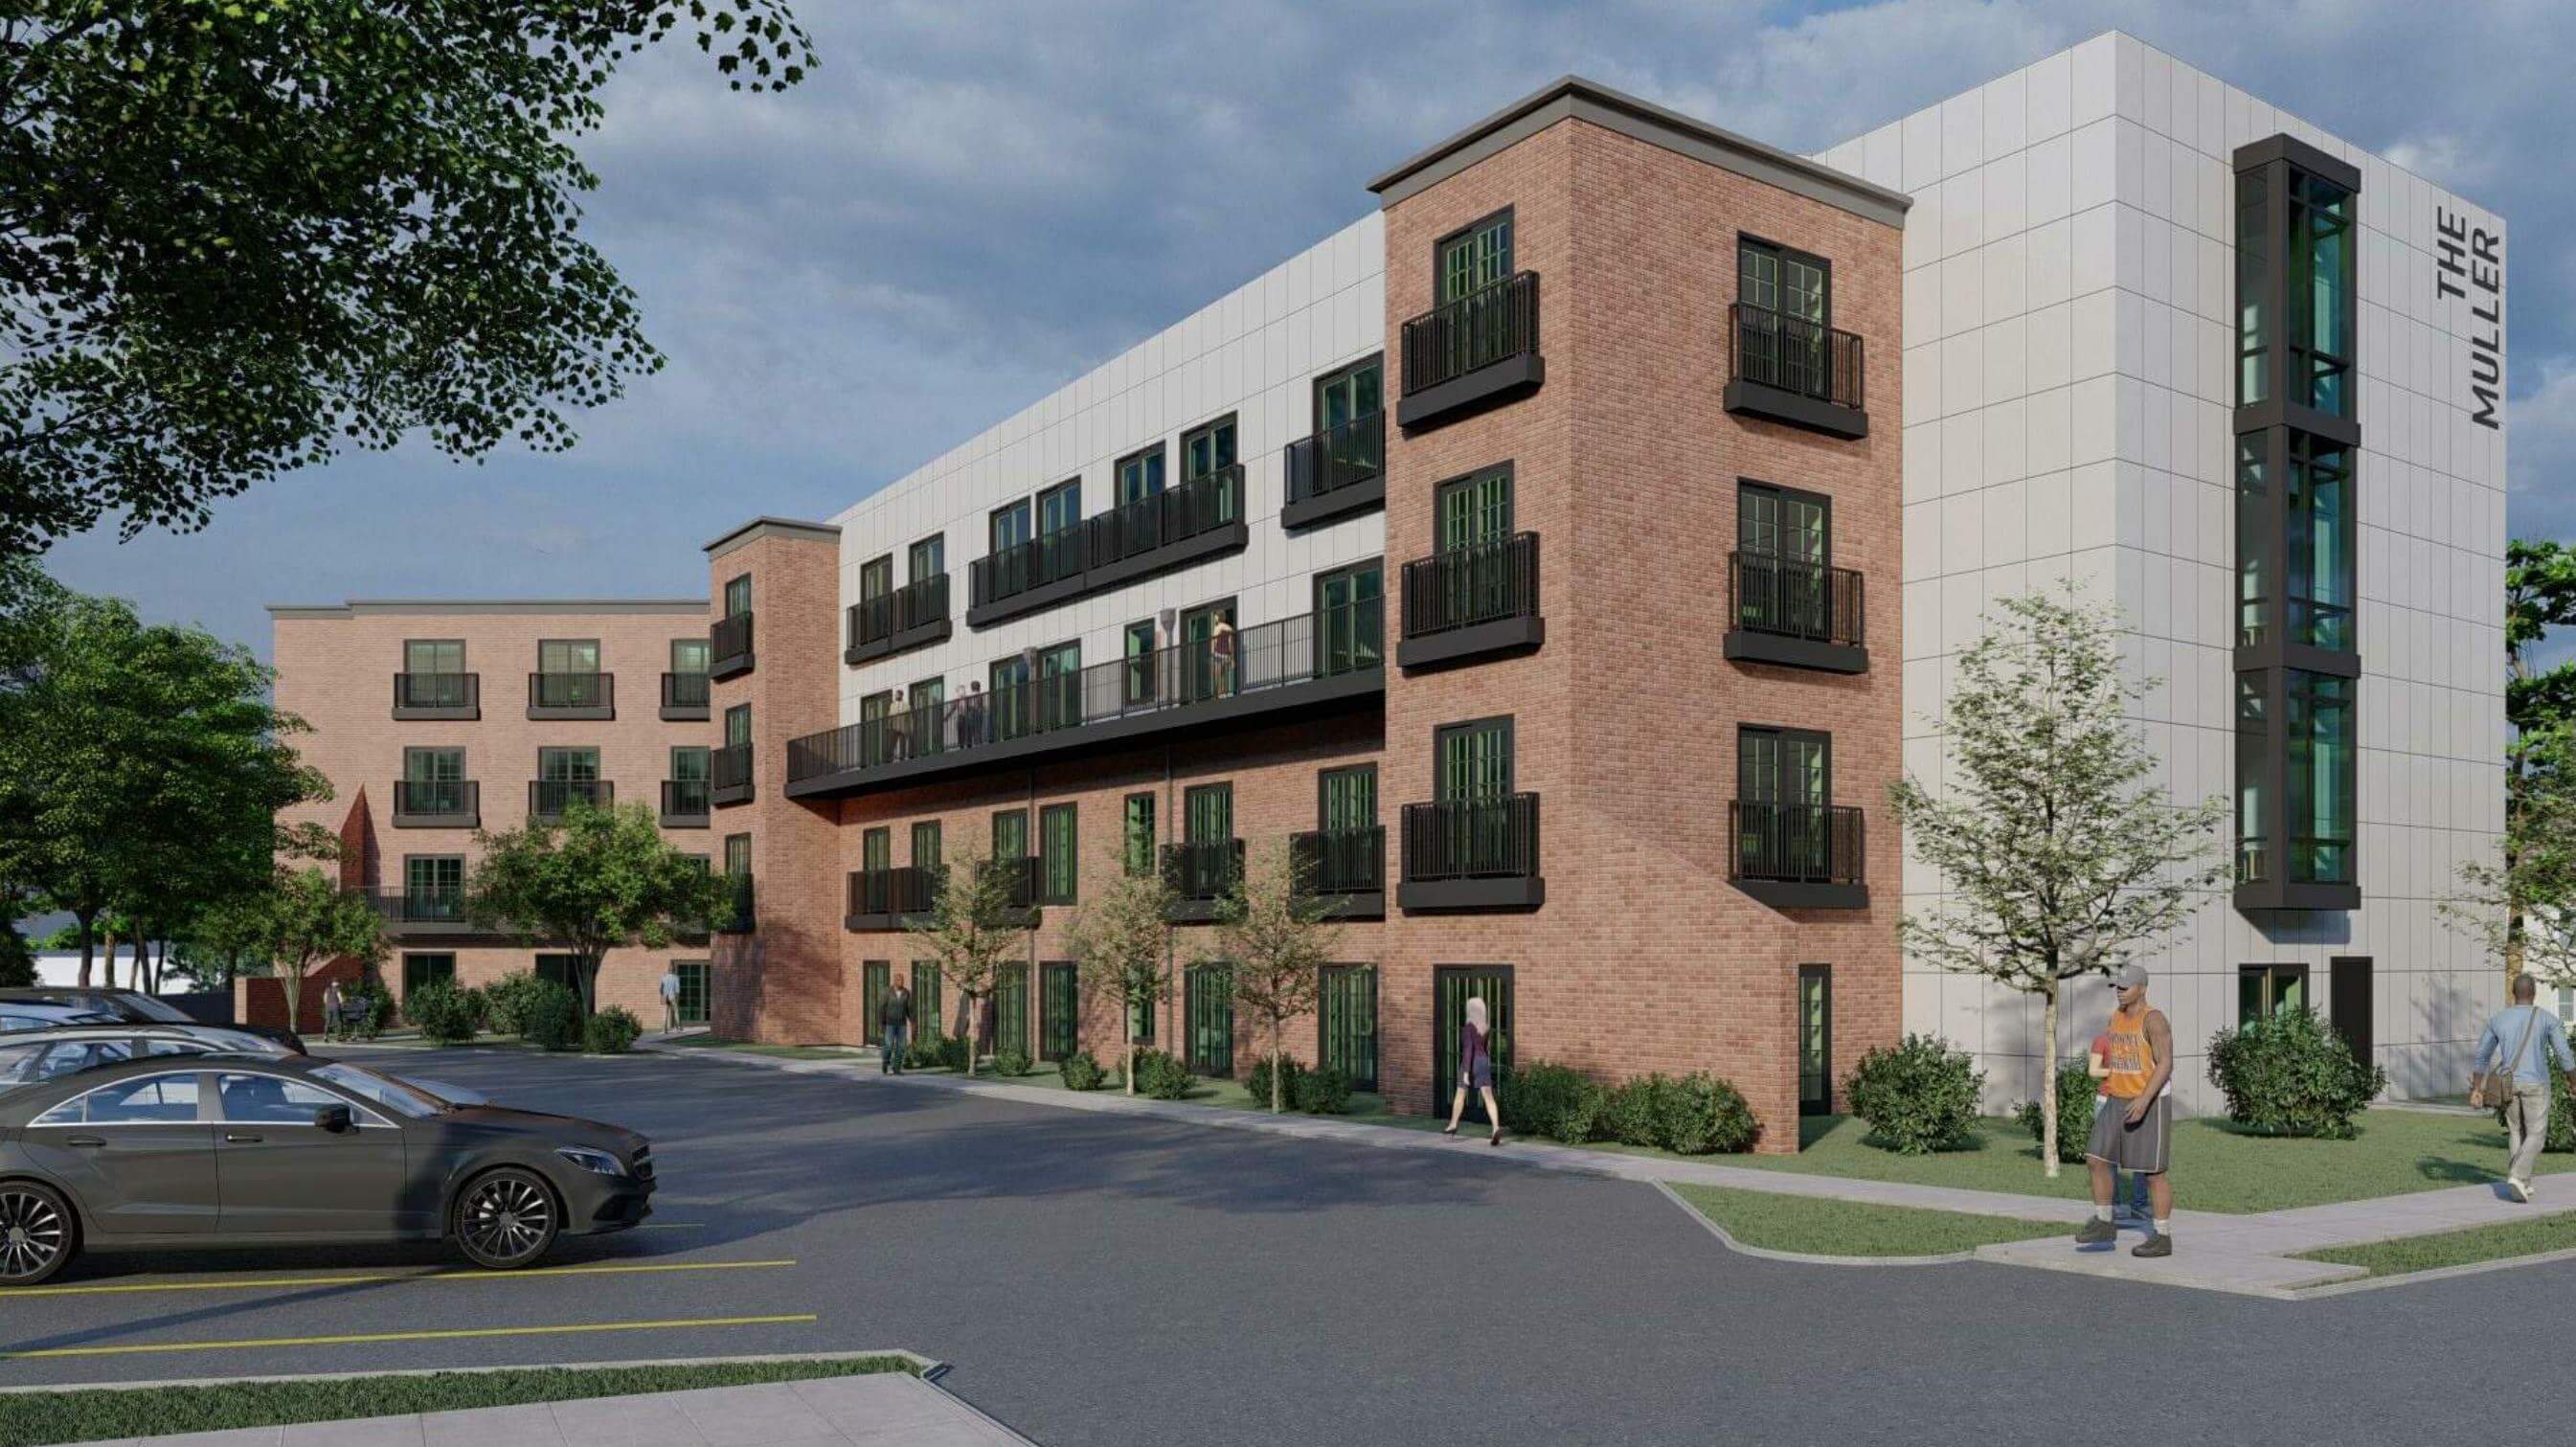 CONGRESS NAMED CONSTRUCTION MANAGER FOR MULTI-FAMILY PROJECT - THE MULLER AT 133 SALEM ST., REVERE, MA